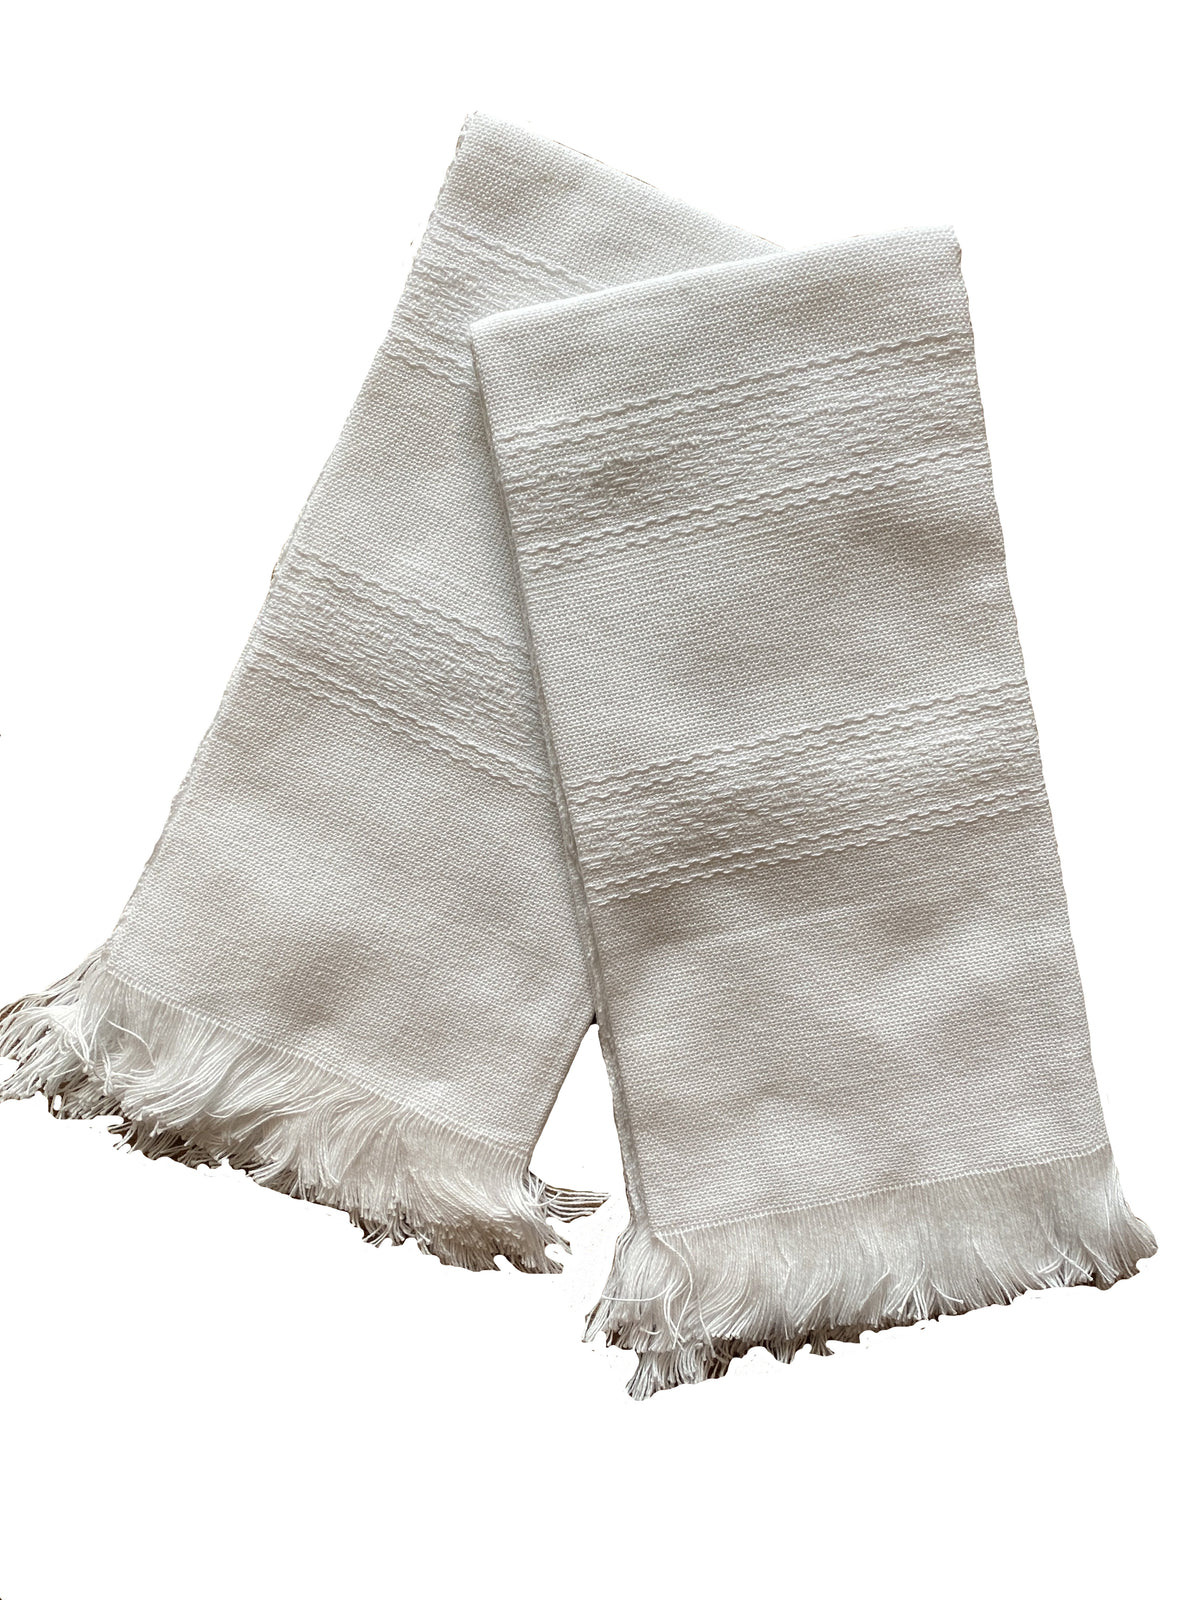 All Cotton Handwoven Towel in White